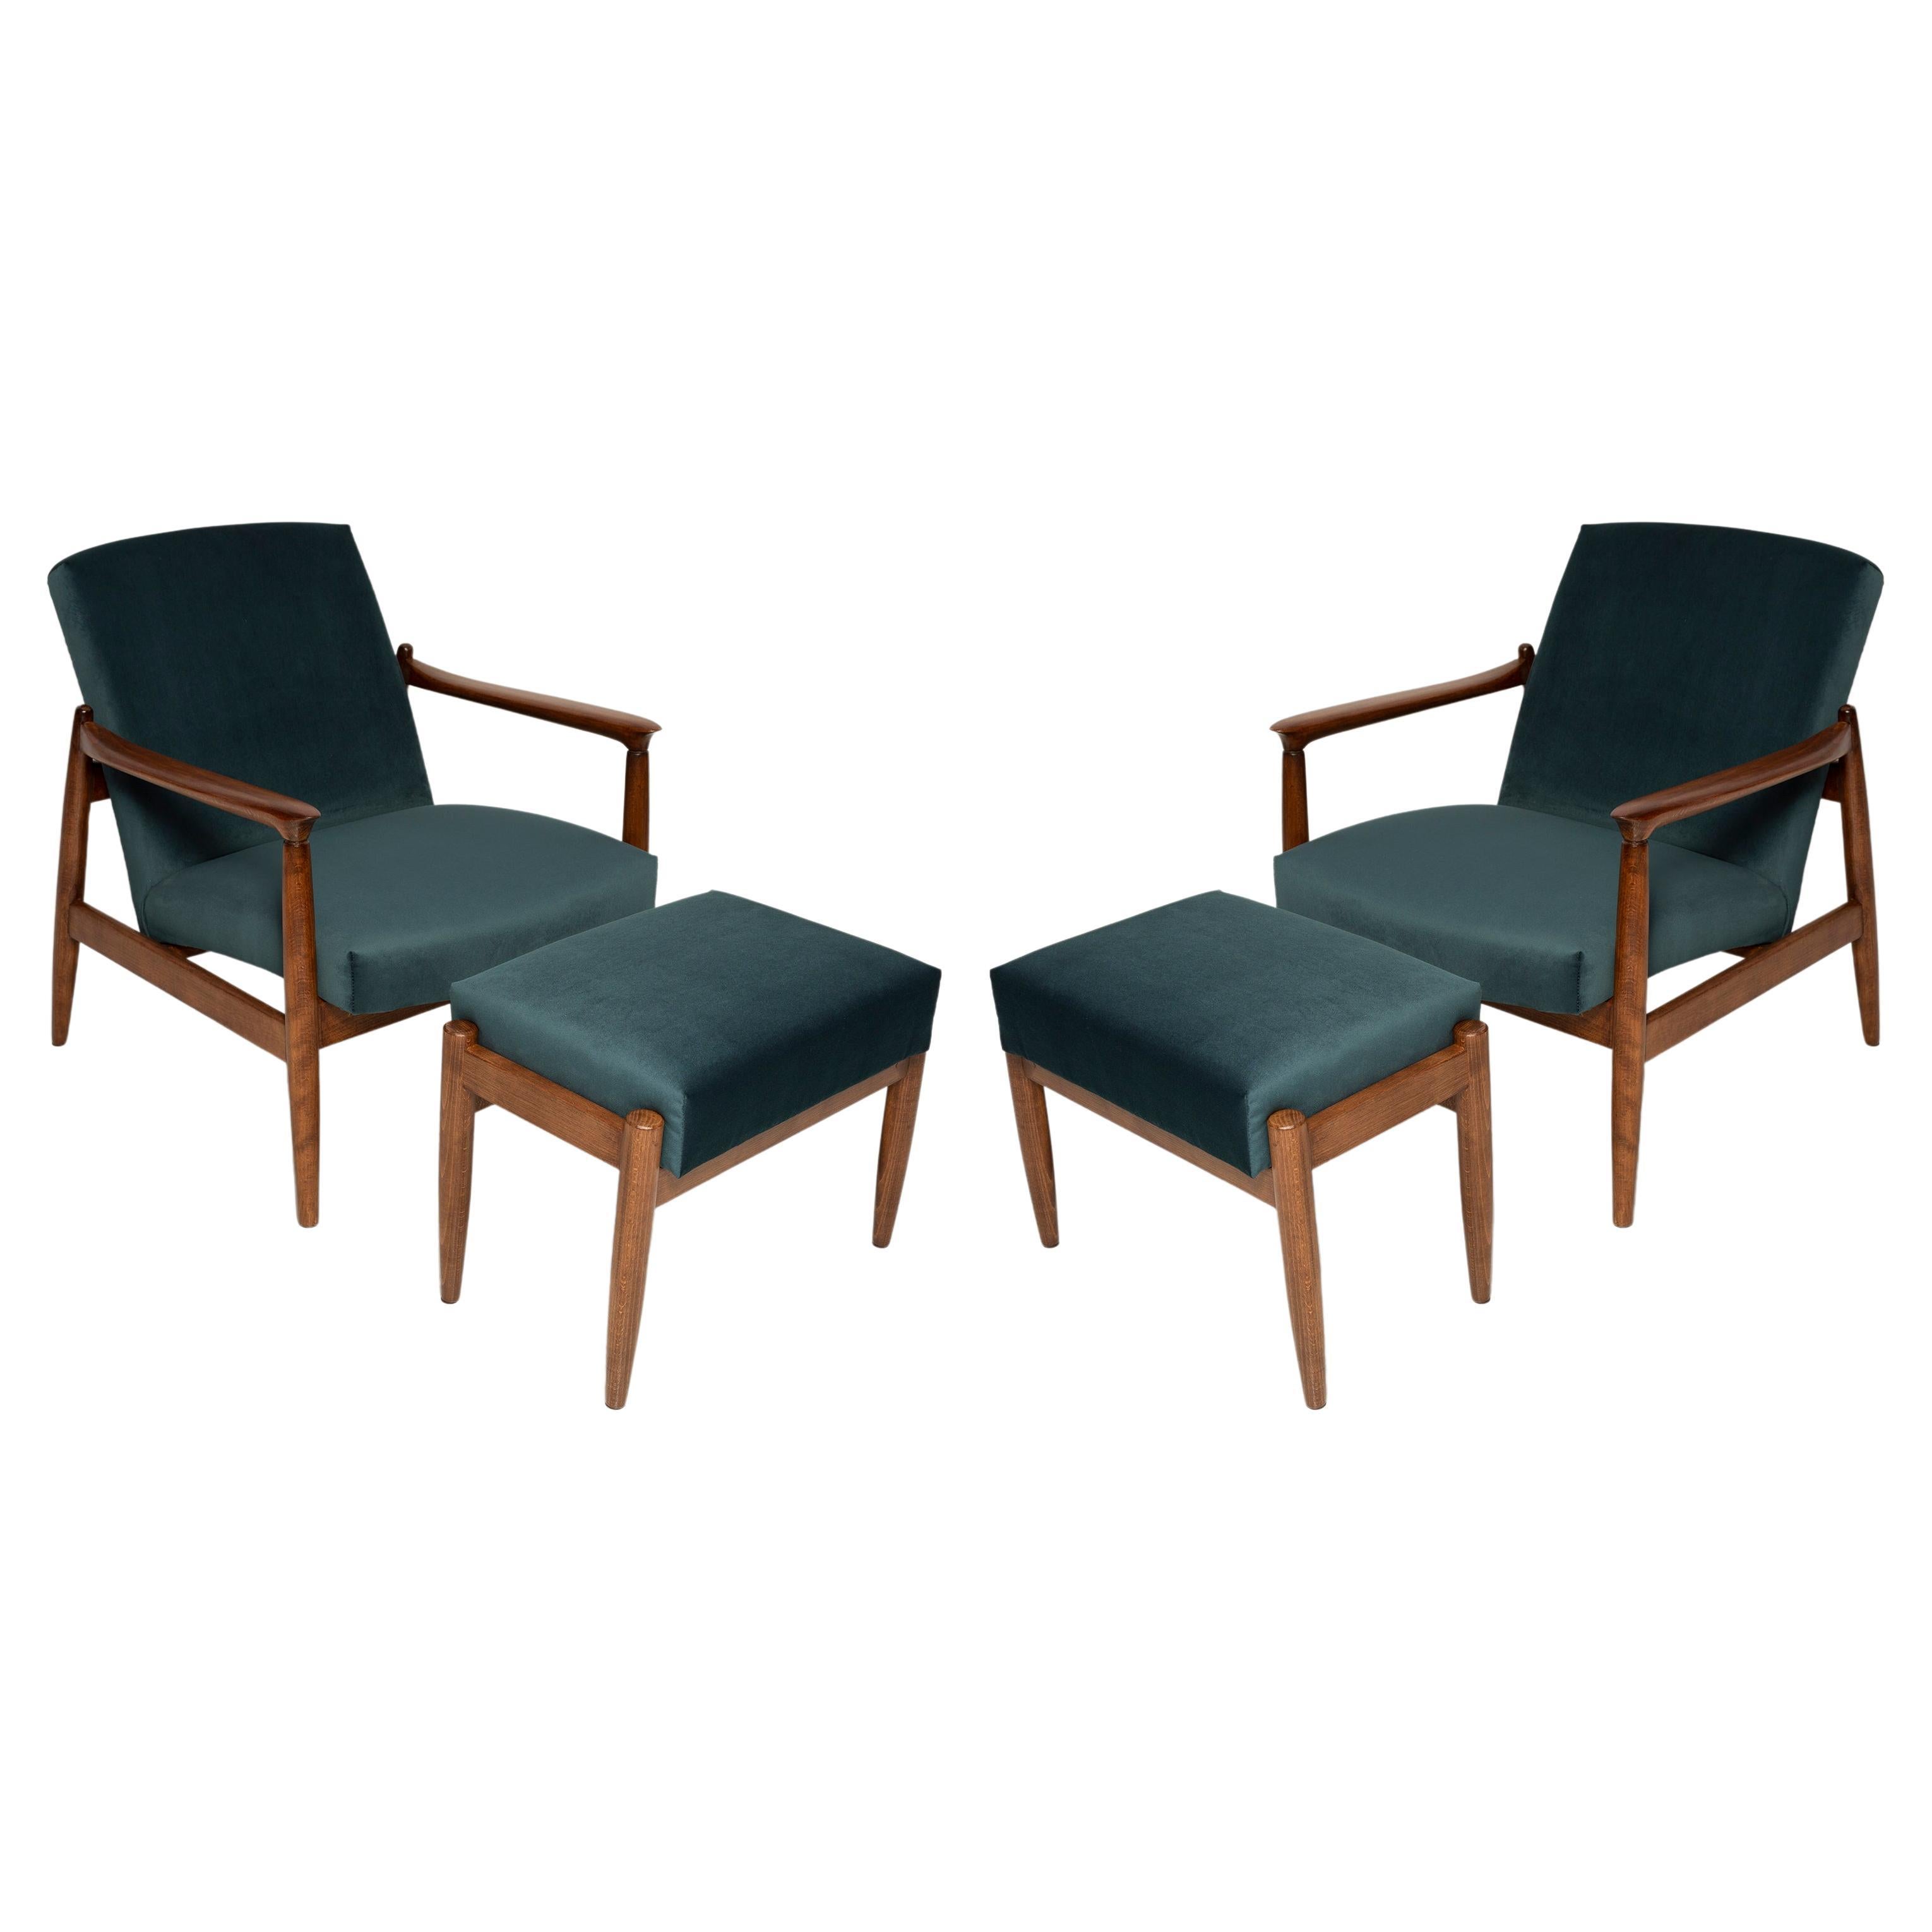 Set of Petrol Blue Vintage Armchairs and Stools, Edmund Homa, 1960s For Sale